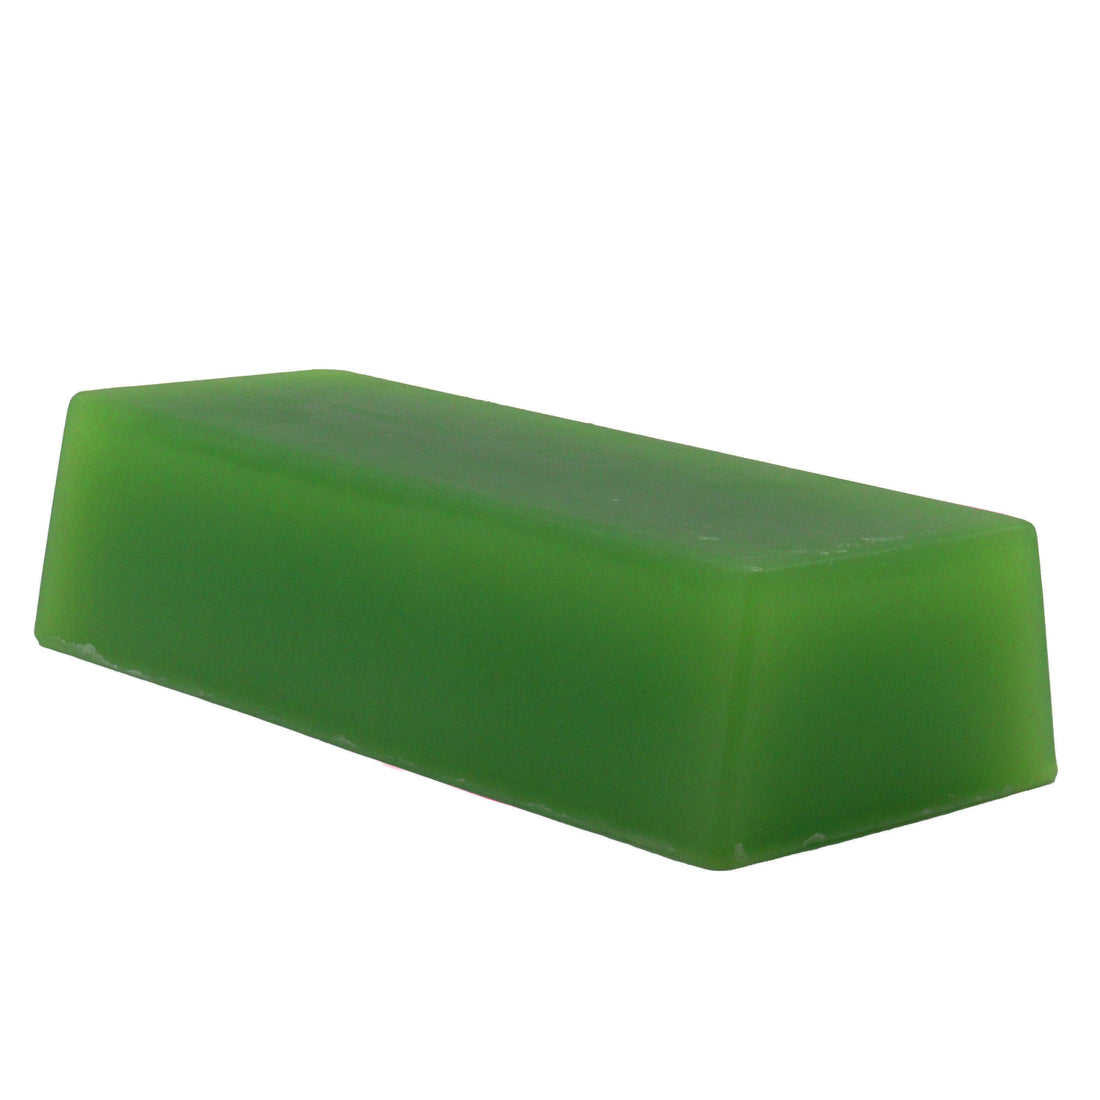 Peppermint - Tint Green - EO Soap Loaf 1.3kg